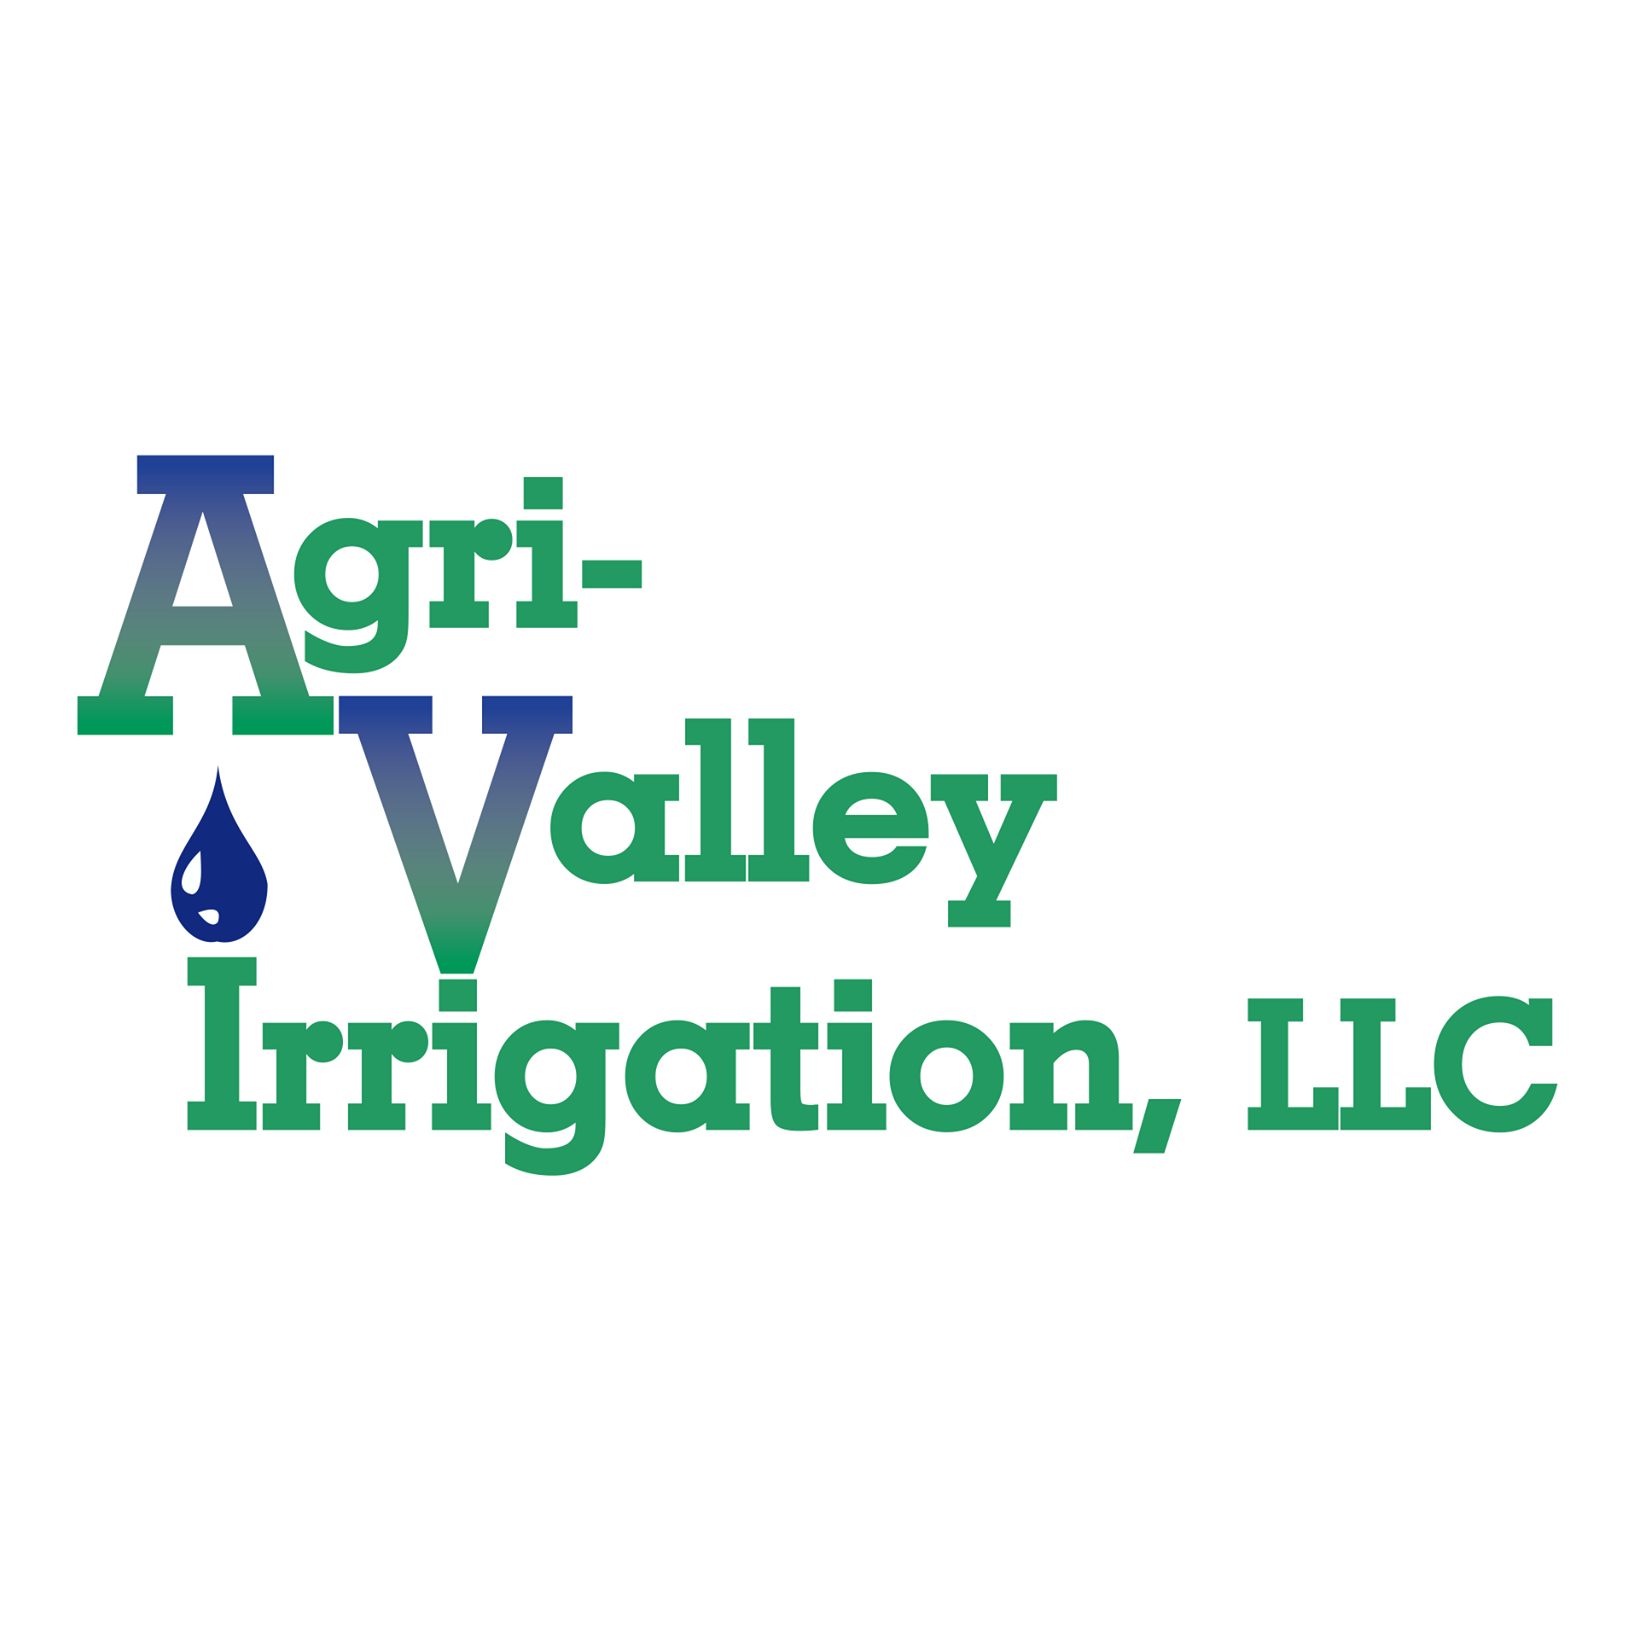 Business logo of Agri Valley Irrigation